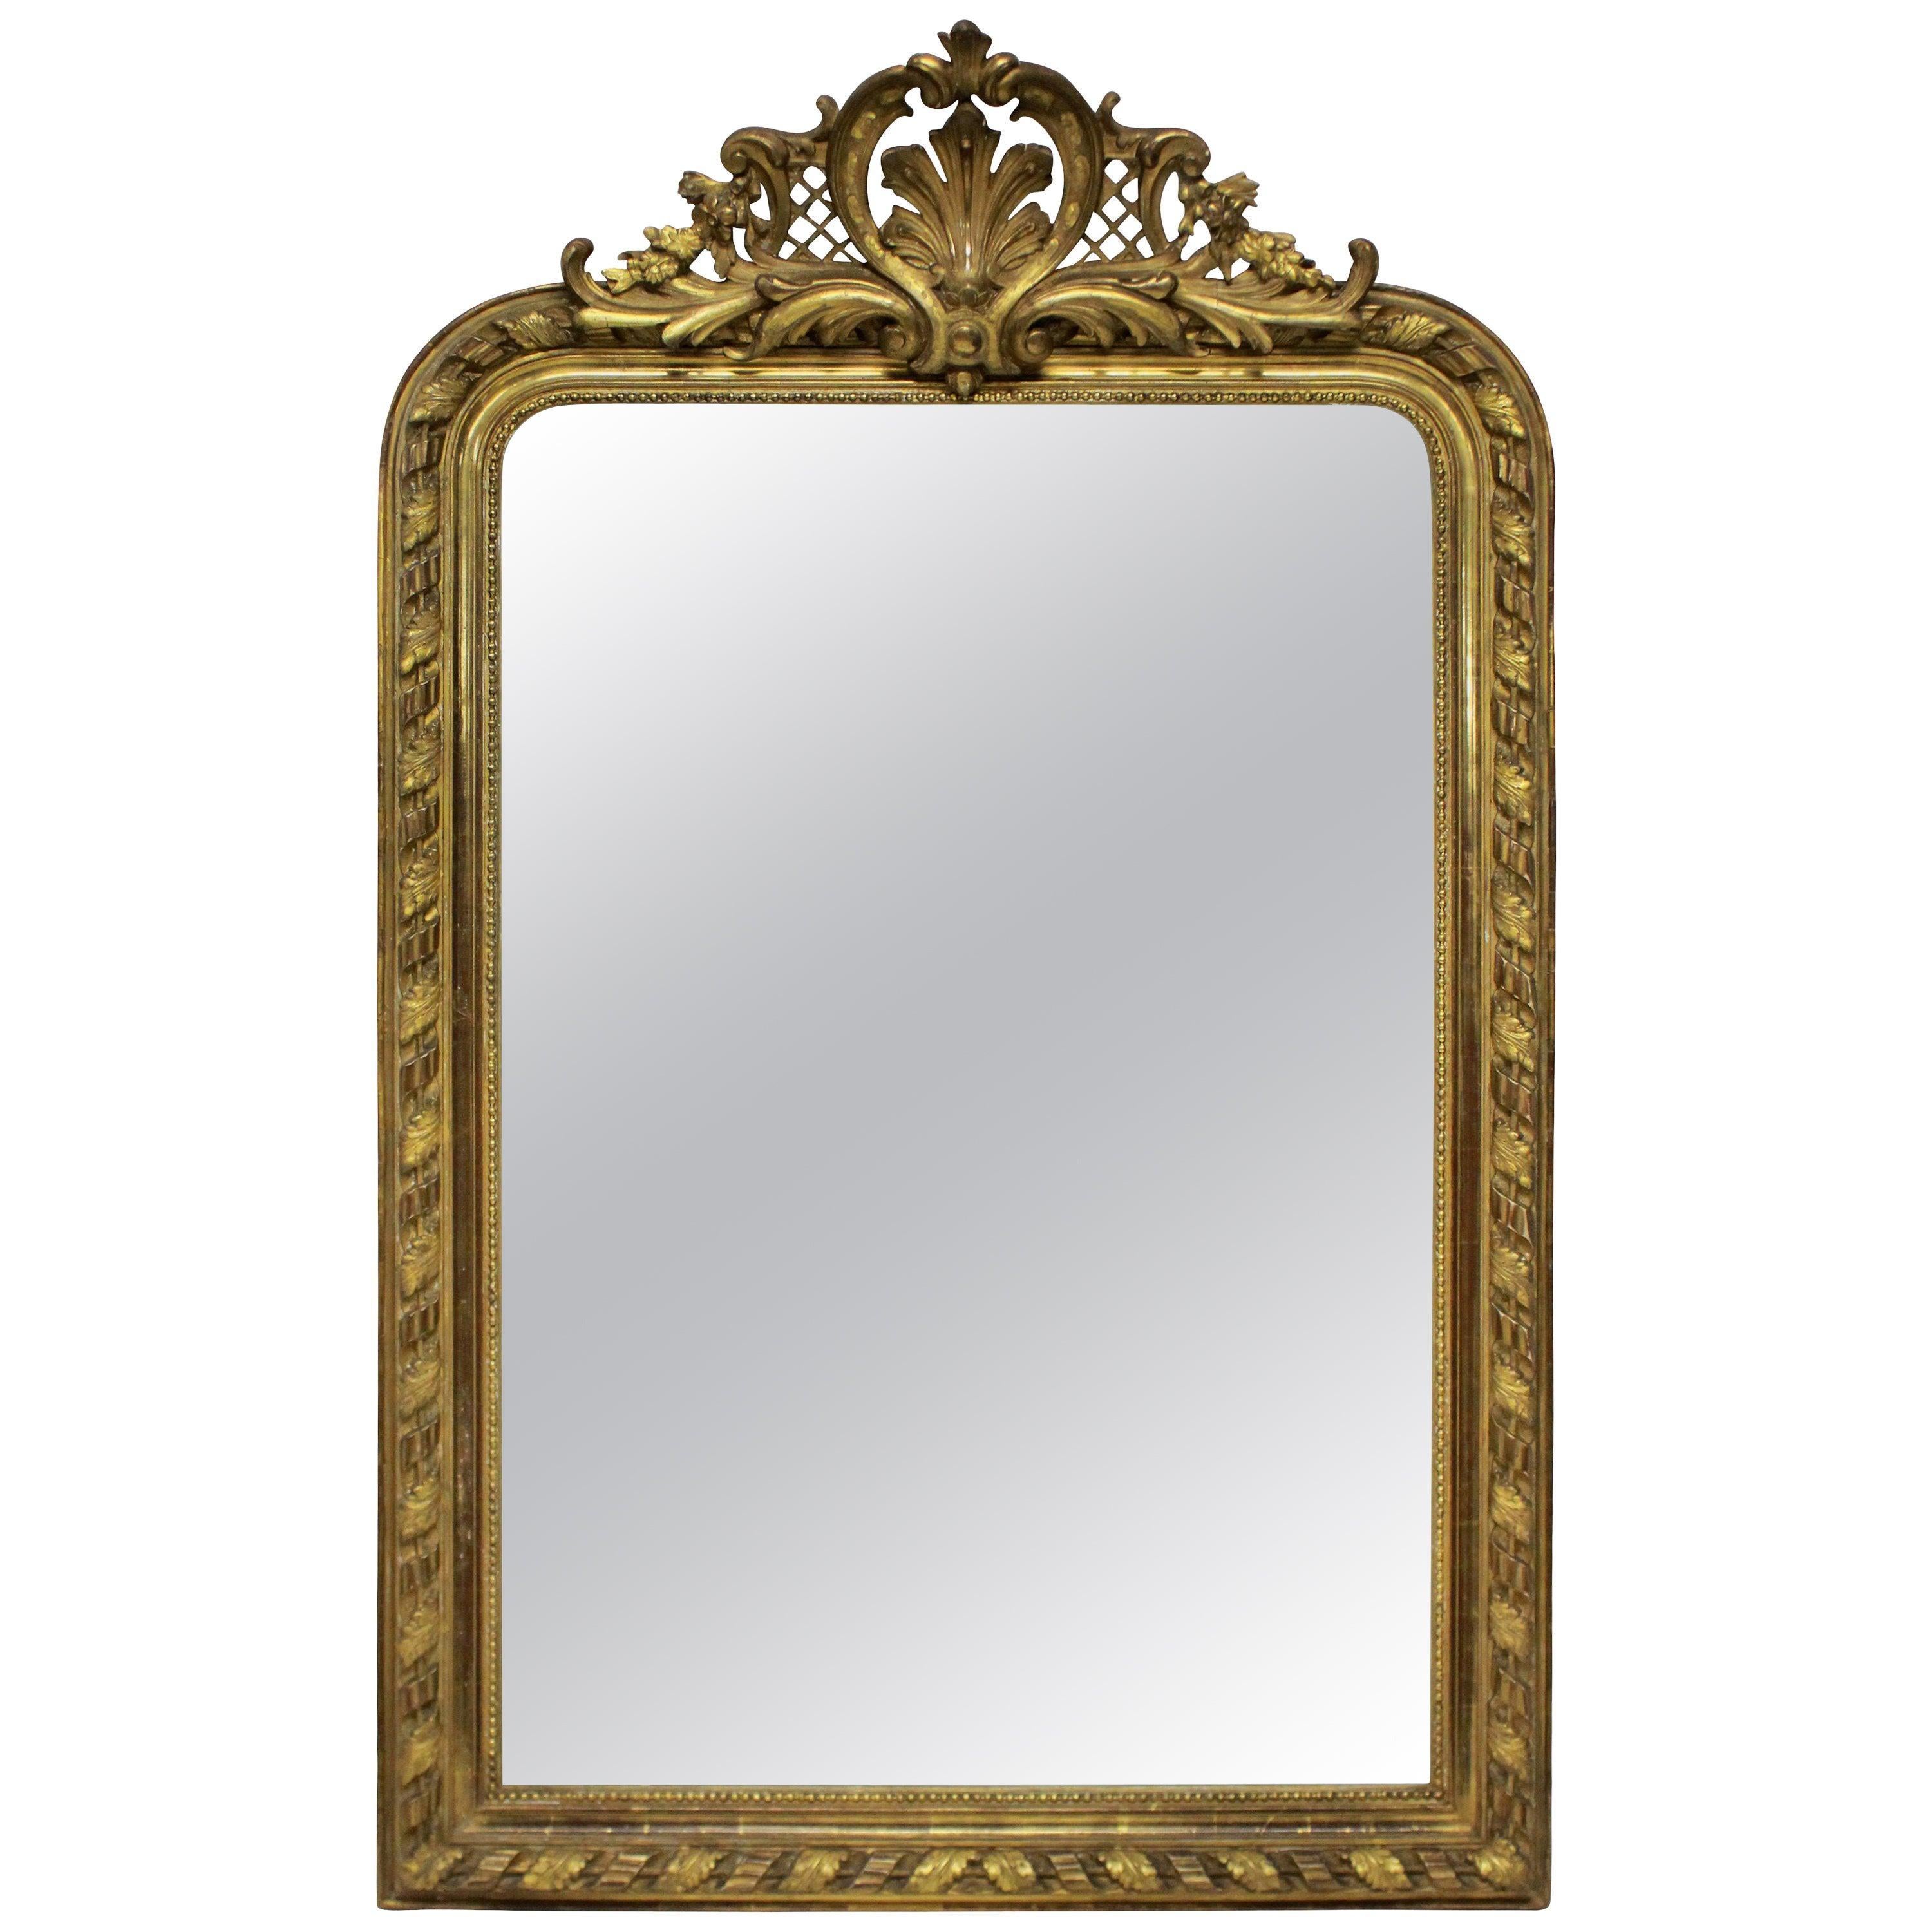 Fine XIX Century French Water Gilded Overmantel Mirror